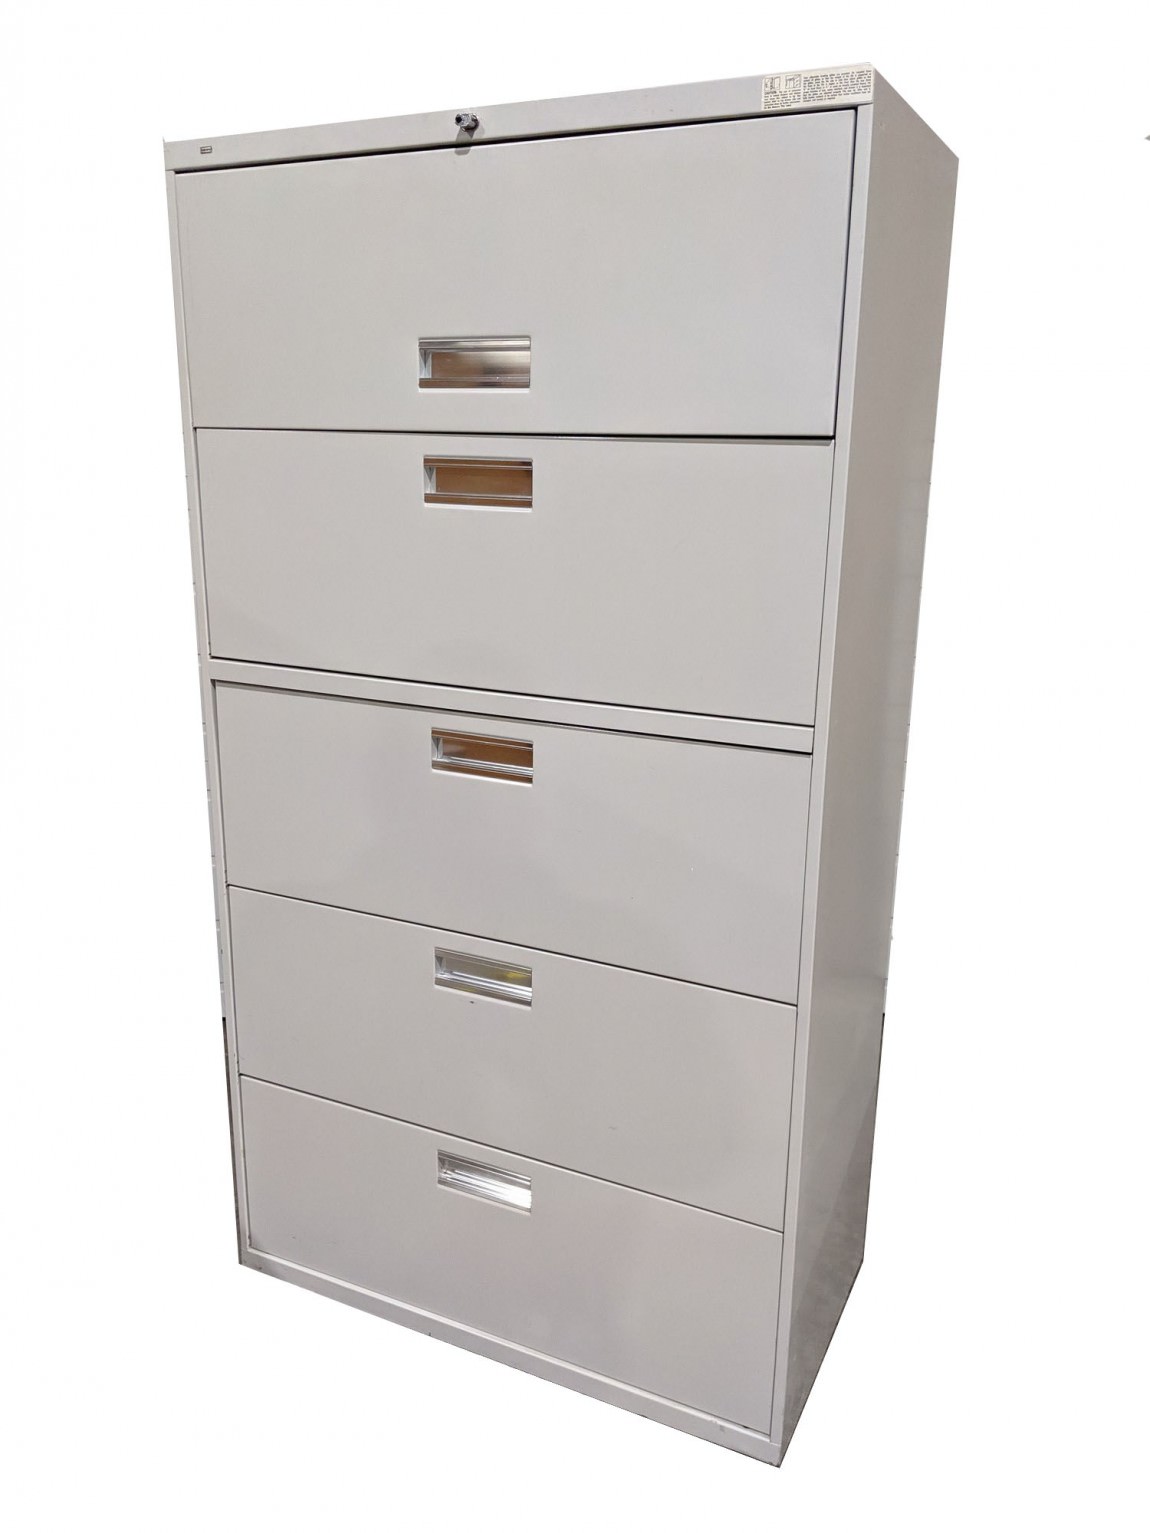 Vertical File Cabinets - HON 5 Drawer Vertical File Cabinet with